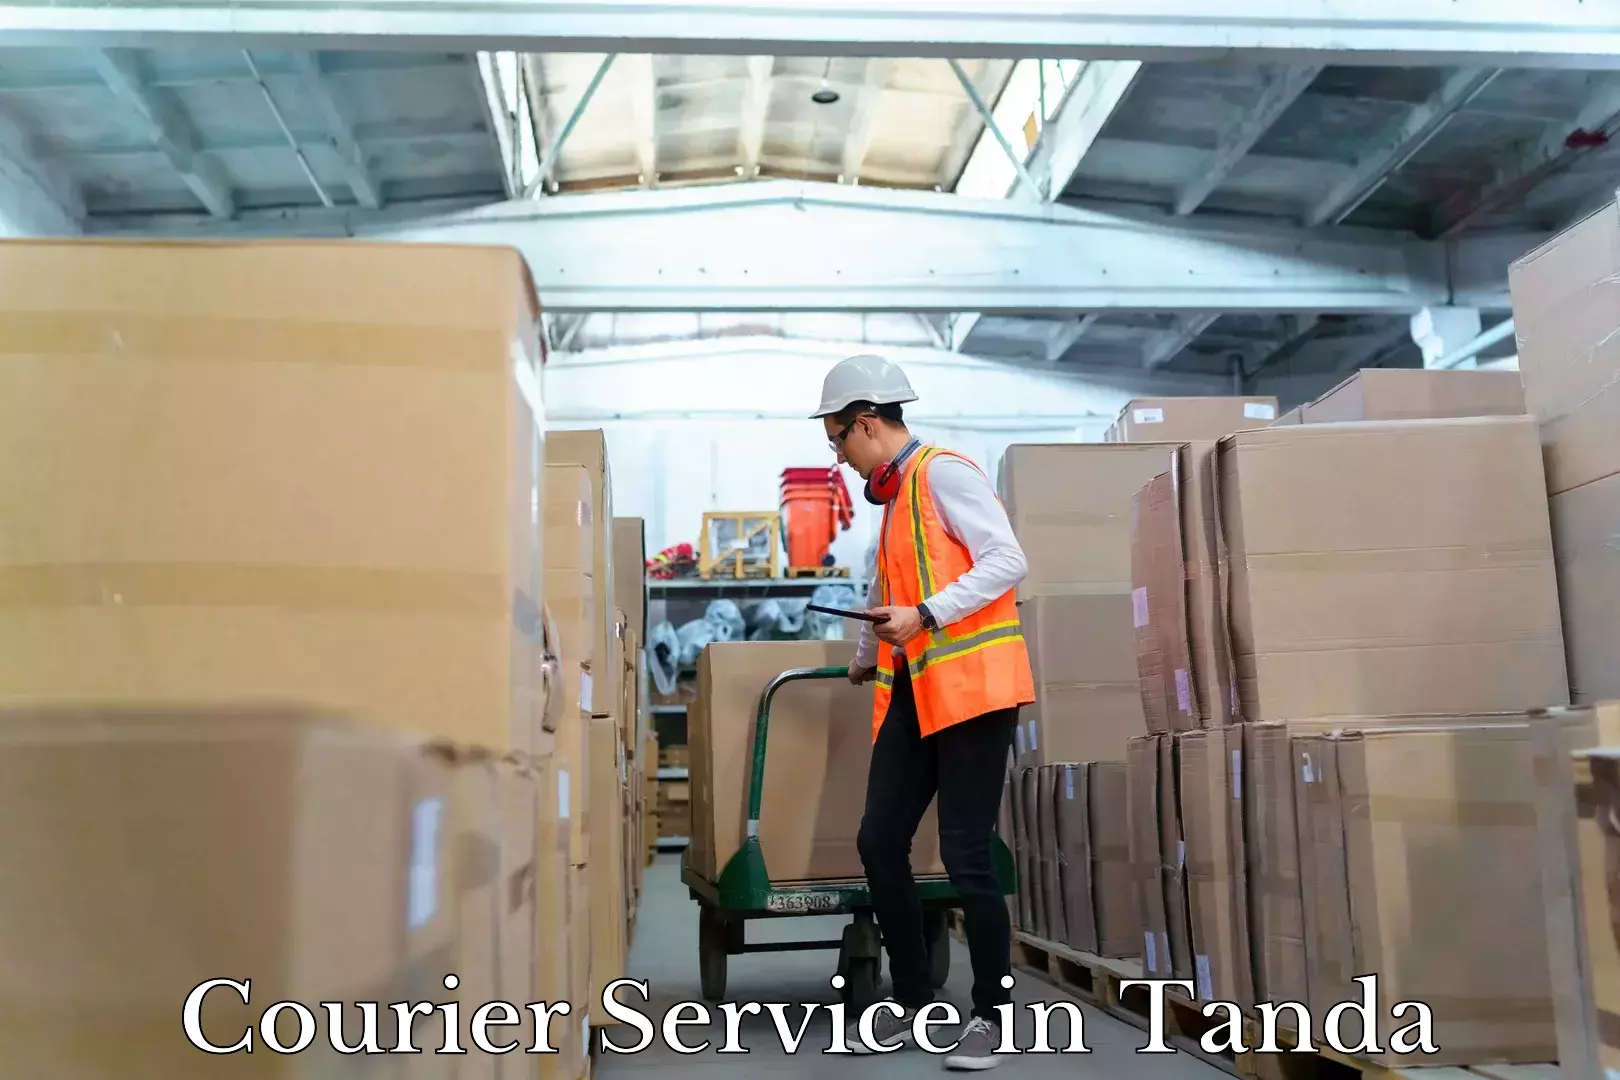 Expedited parcel delivery in Tanda